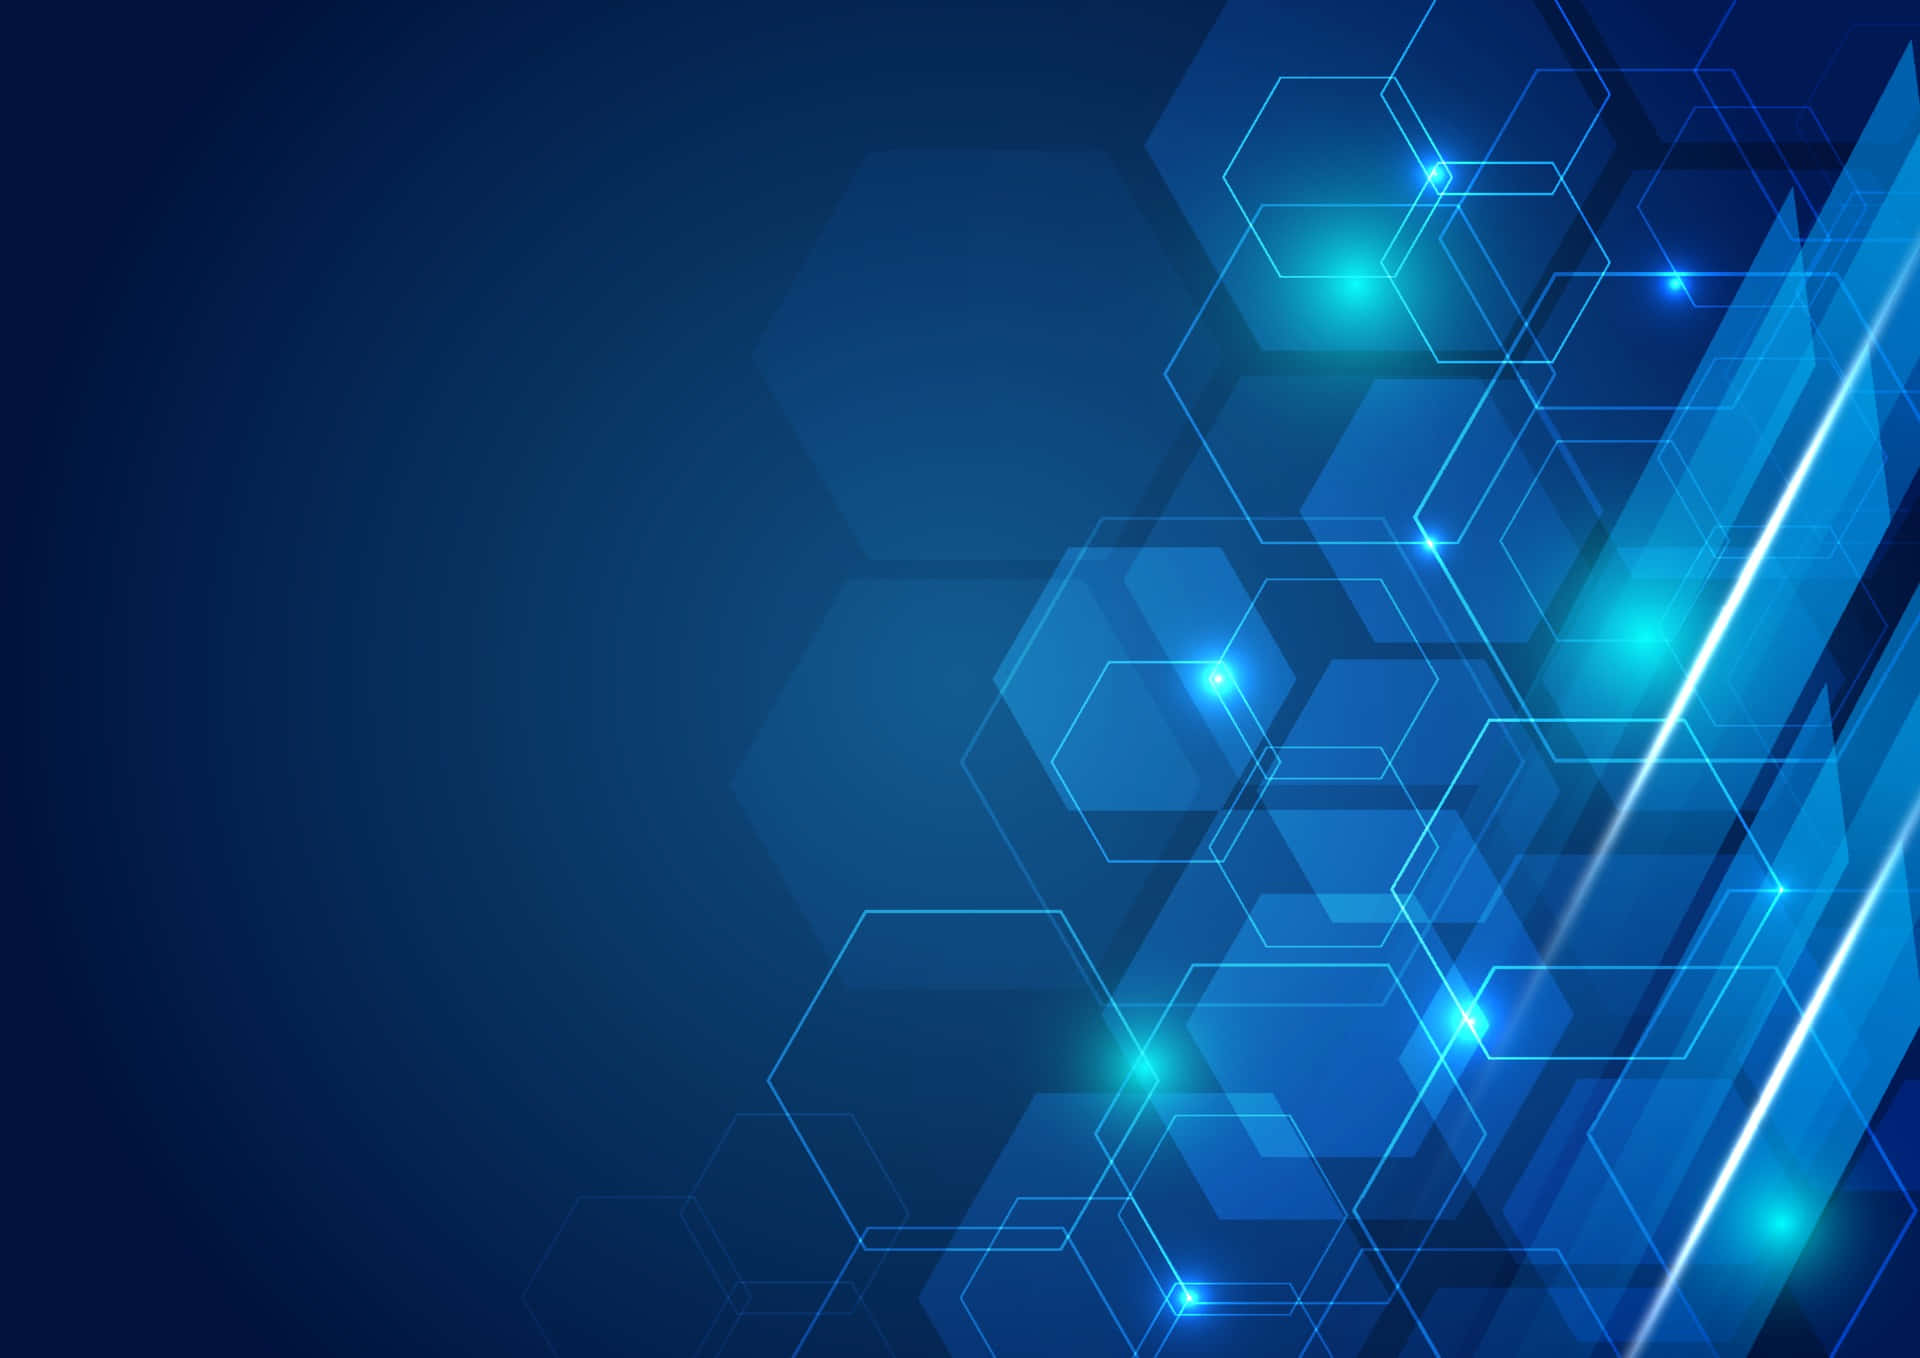 Blue Hexagonal Background With Lights And A Blue Light